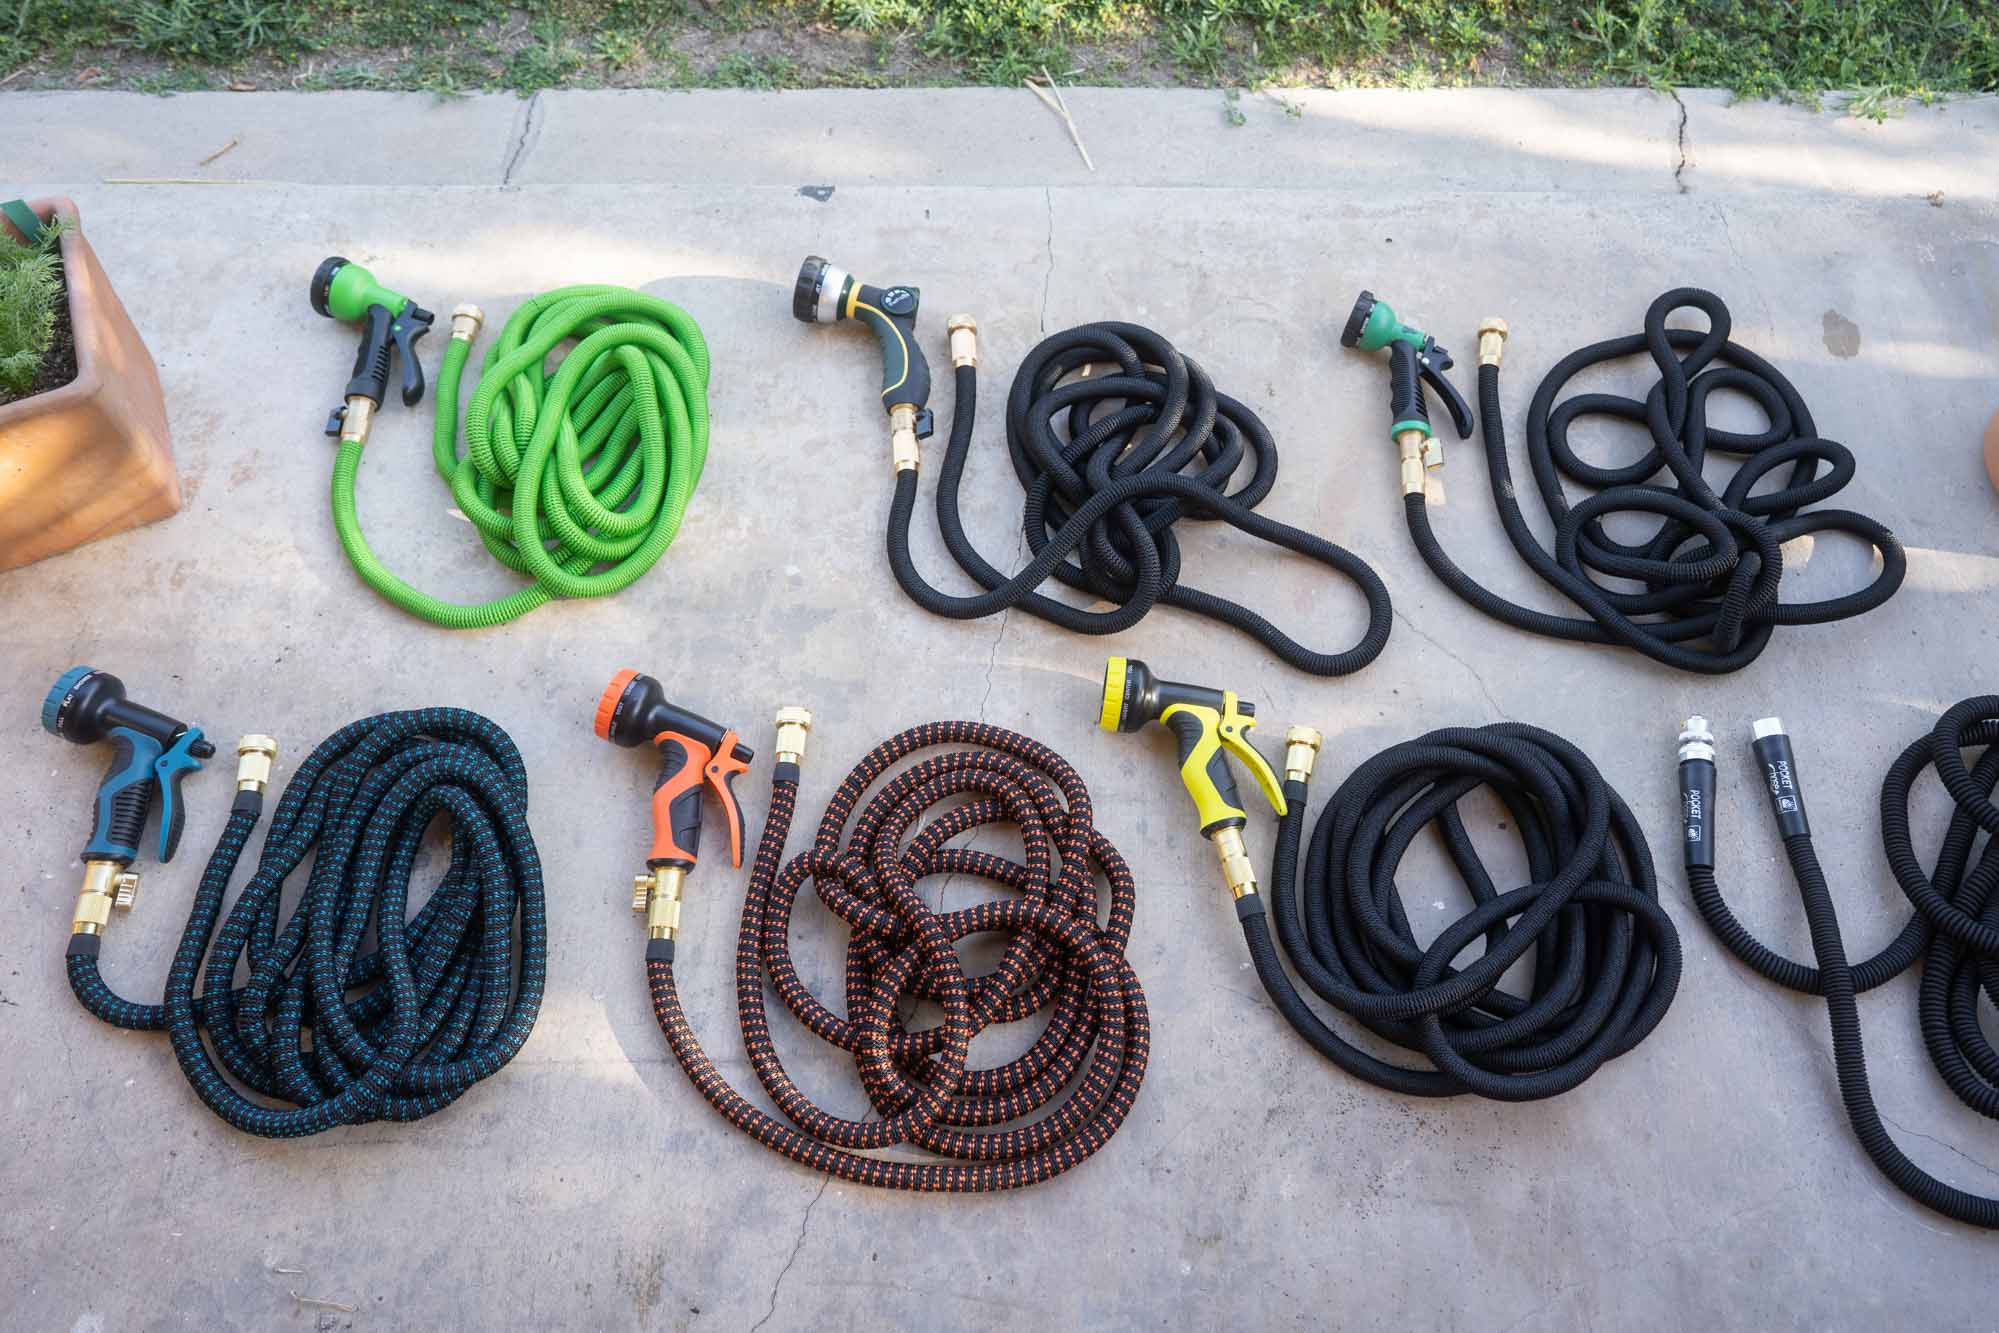 Get to Know Garden Hose Layers Before You Buy